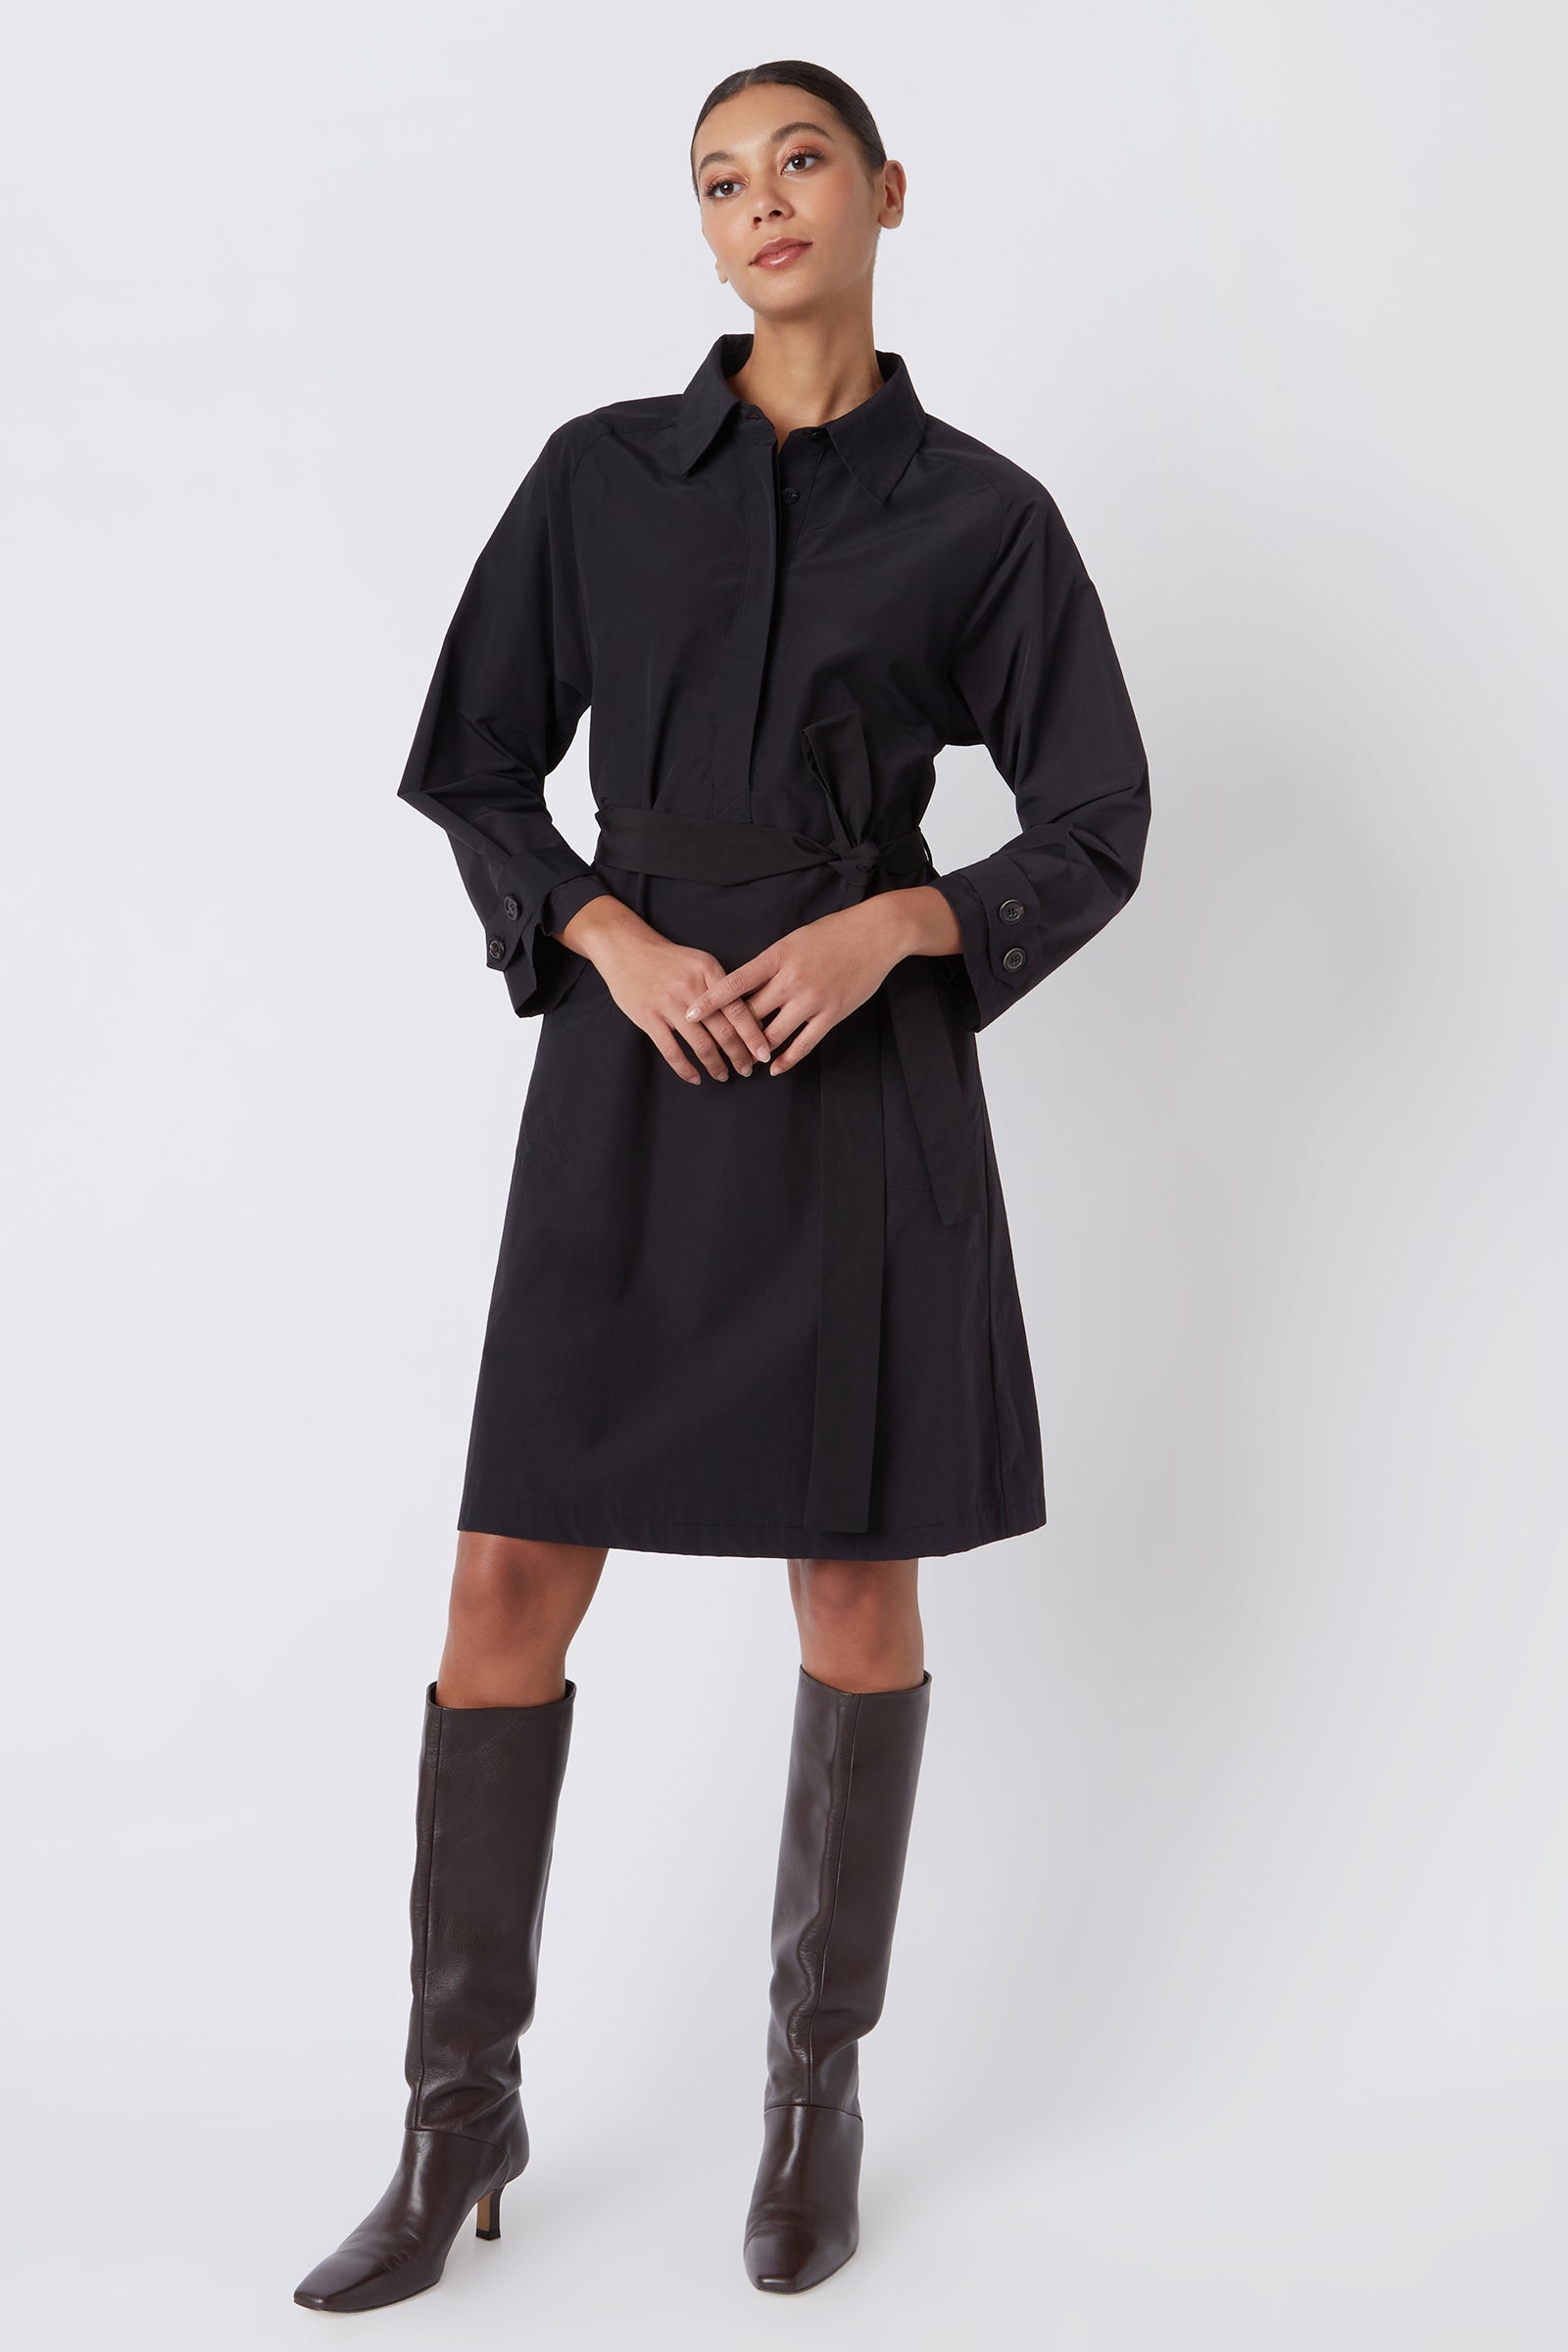 Kal Rieman Bonnie Pleat Back Dress in Black Italian Broadcloth on Model with Hands in Front Full Front View